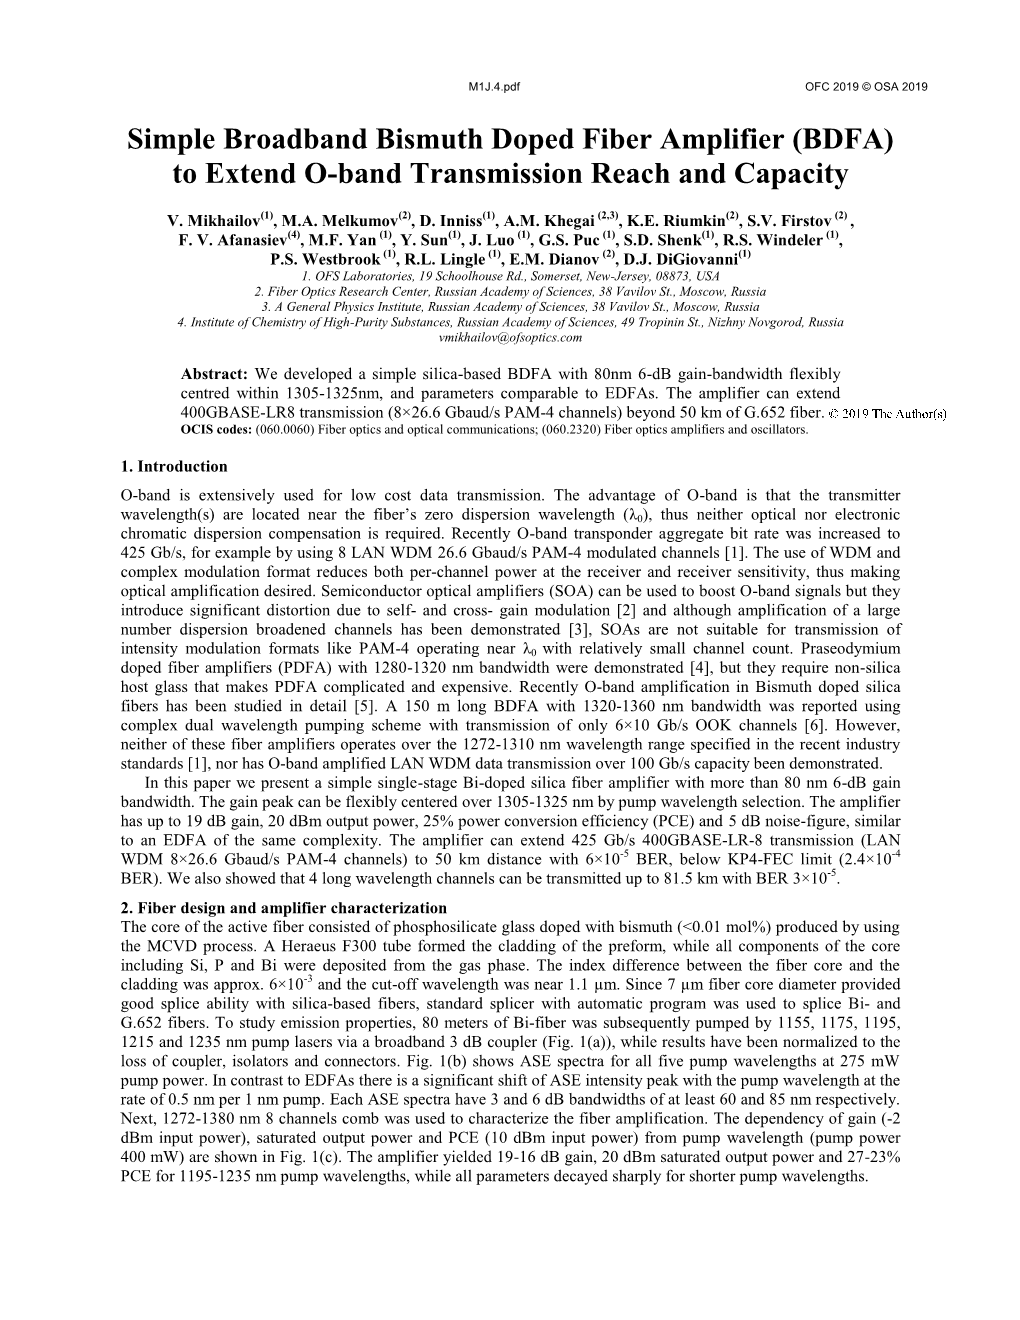 Simple Broadband Bismuth Doped Fiber Amplifier (BDFA) to Extend O-Band Transmission Reach and Capacity